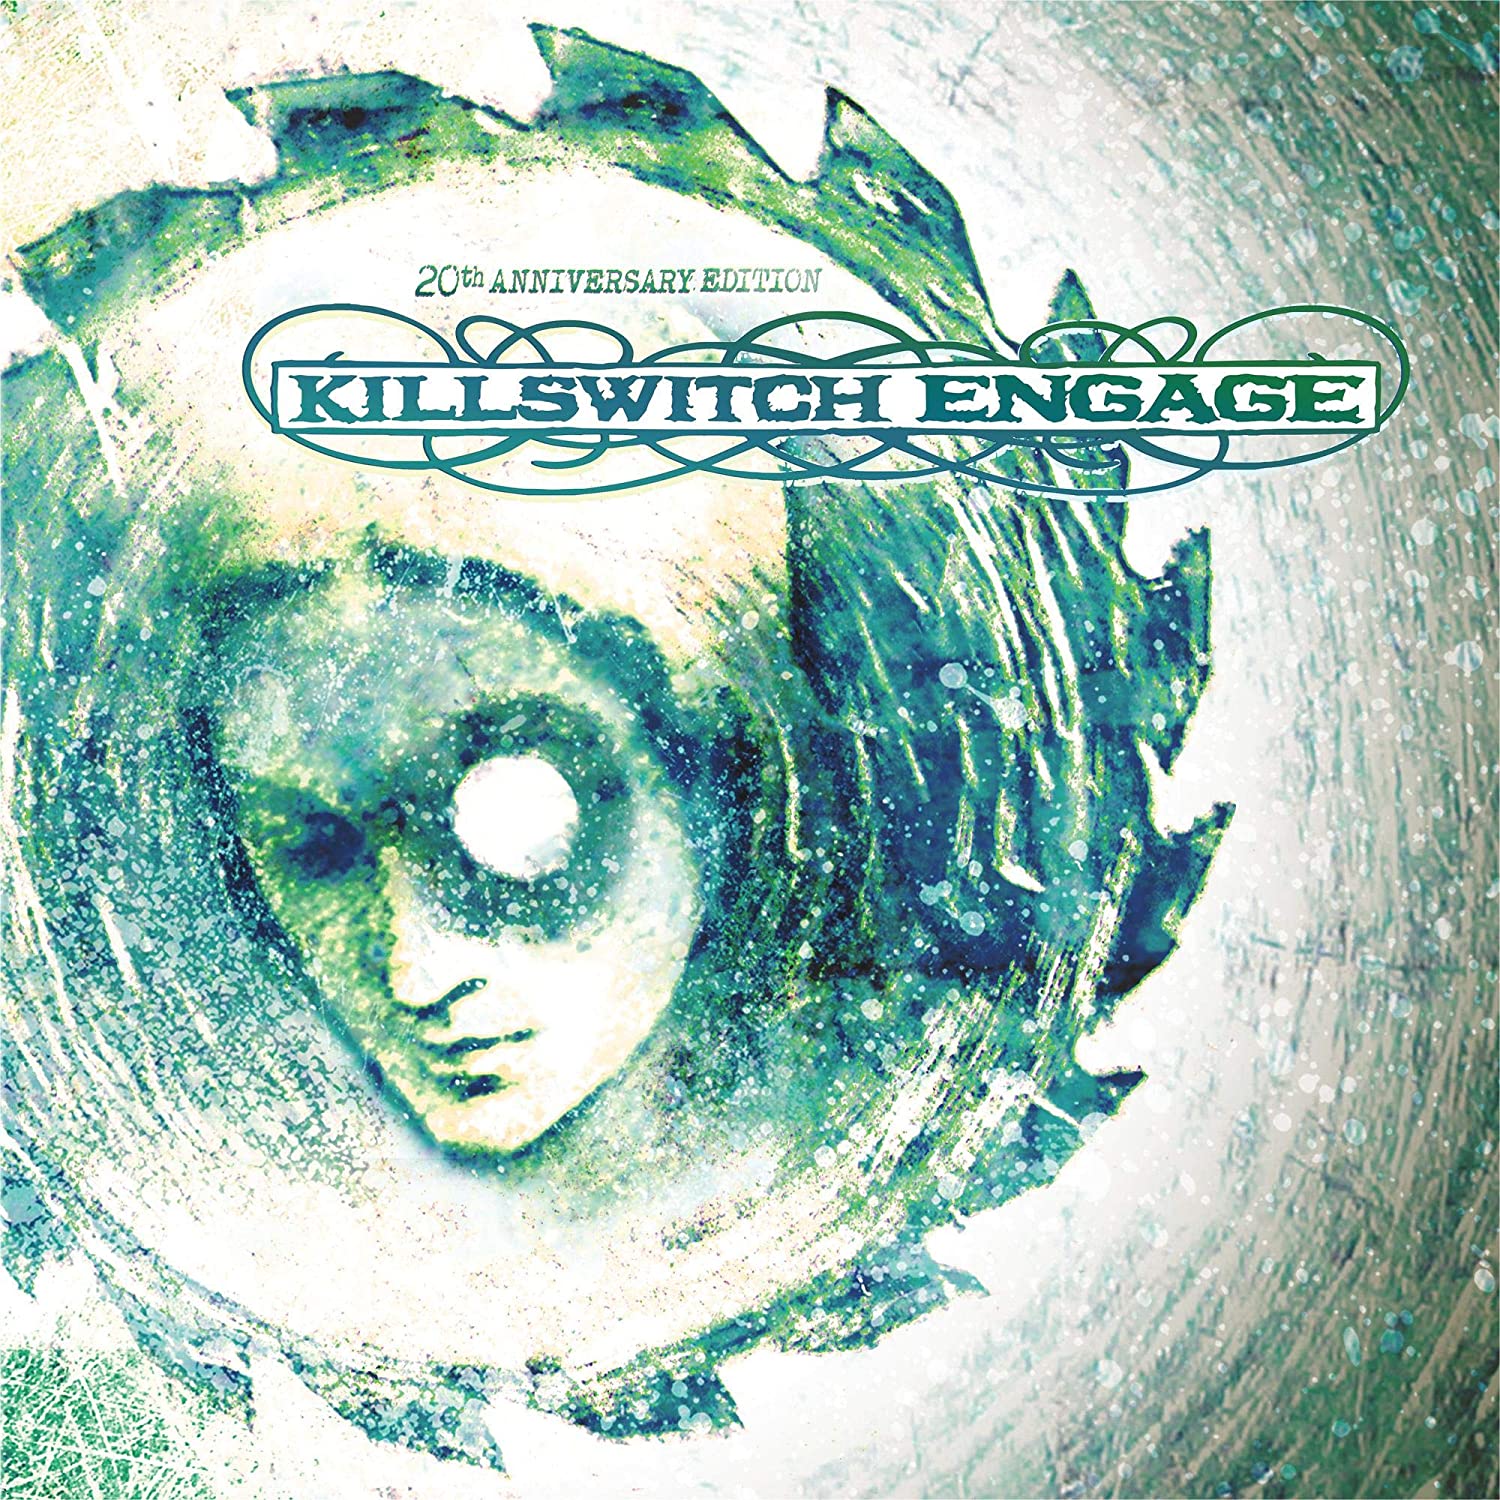 Killswitch Engage- Killswitch Engage: 20th Anniv [Clear/Doublemint Splatter LP] - Darkside Records